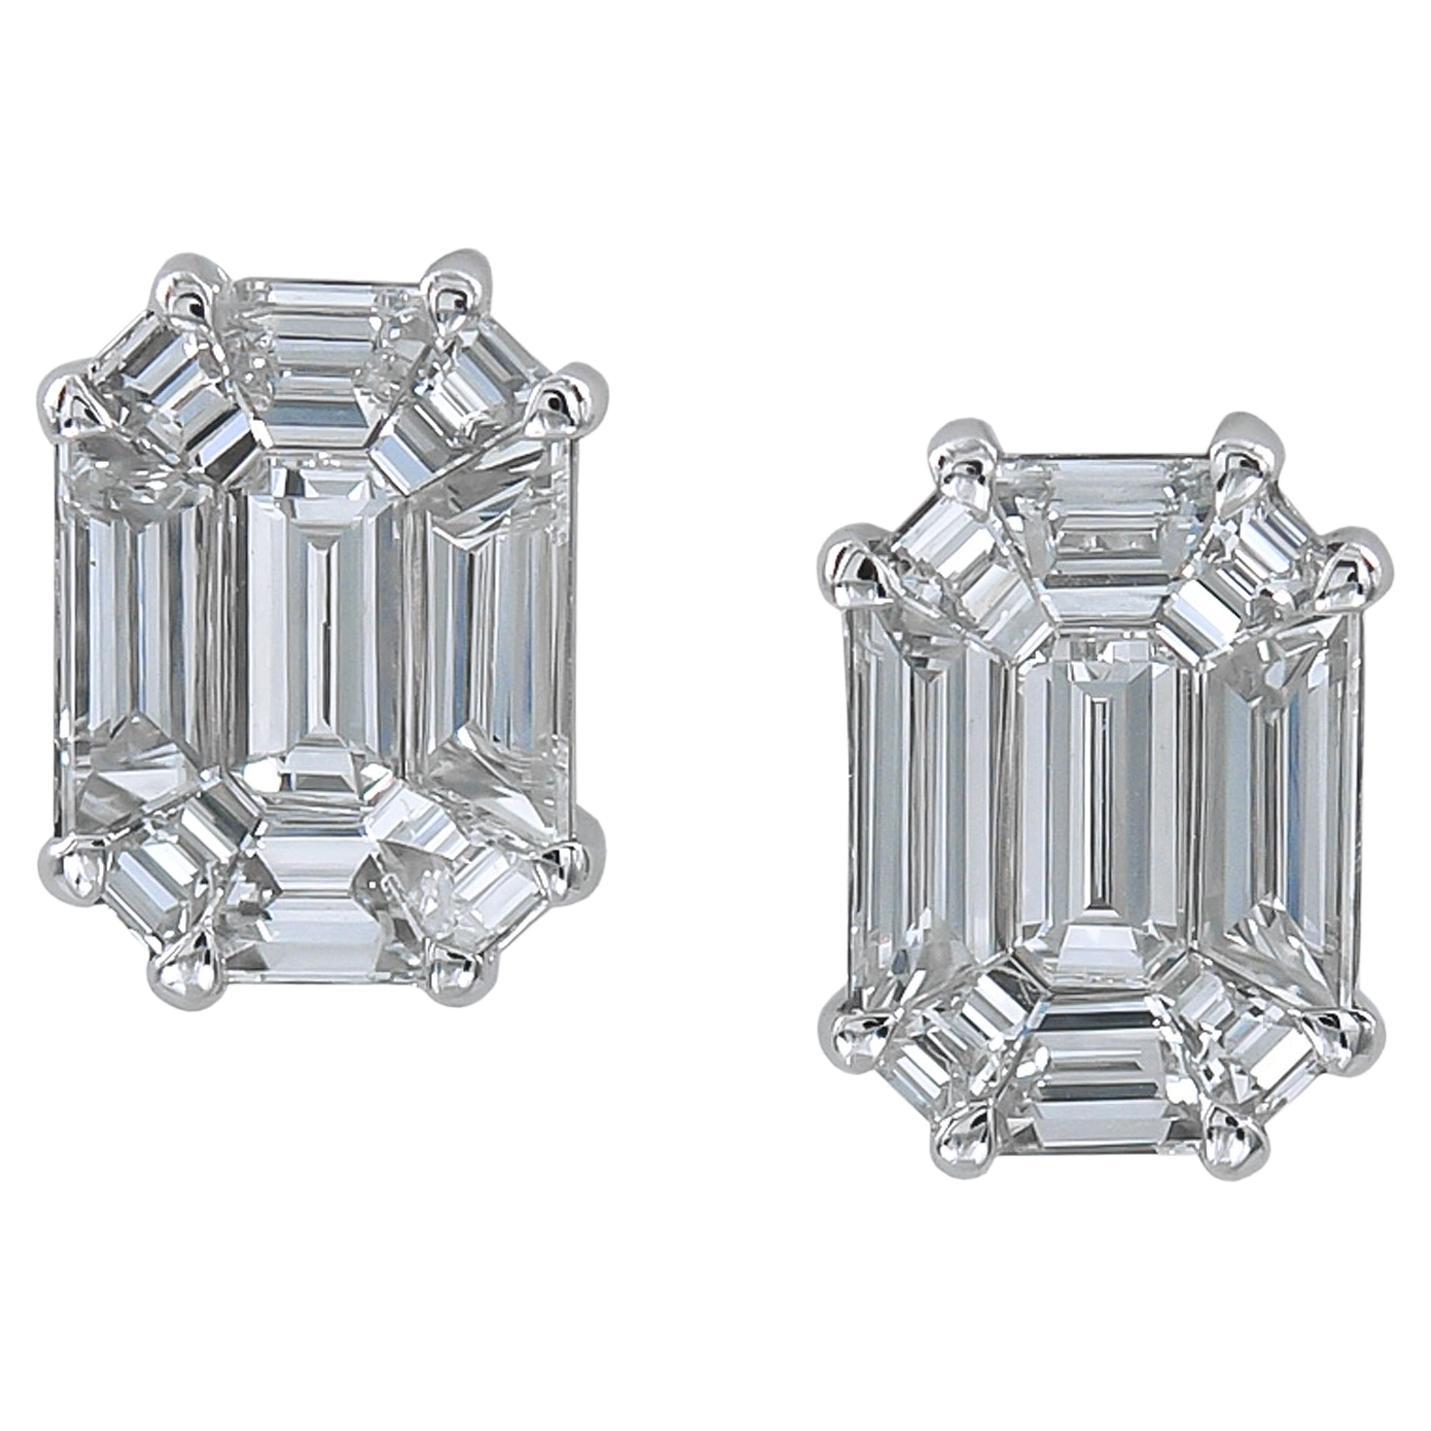 Spectra Fine Jewelry Invisibly-set Diamond Stud Earrings For Sale